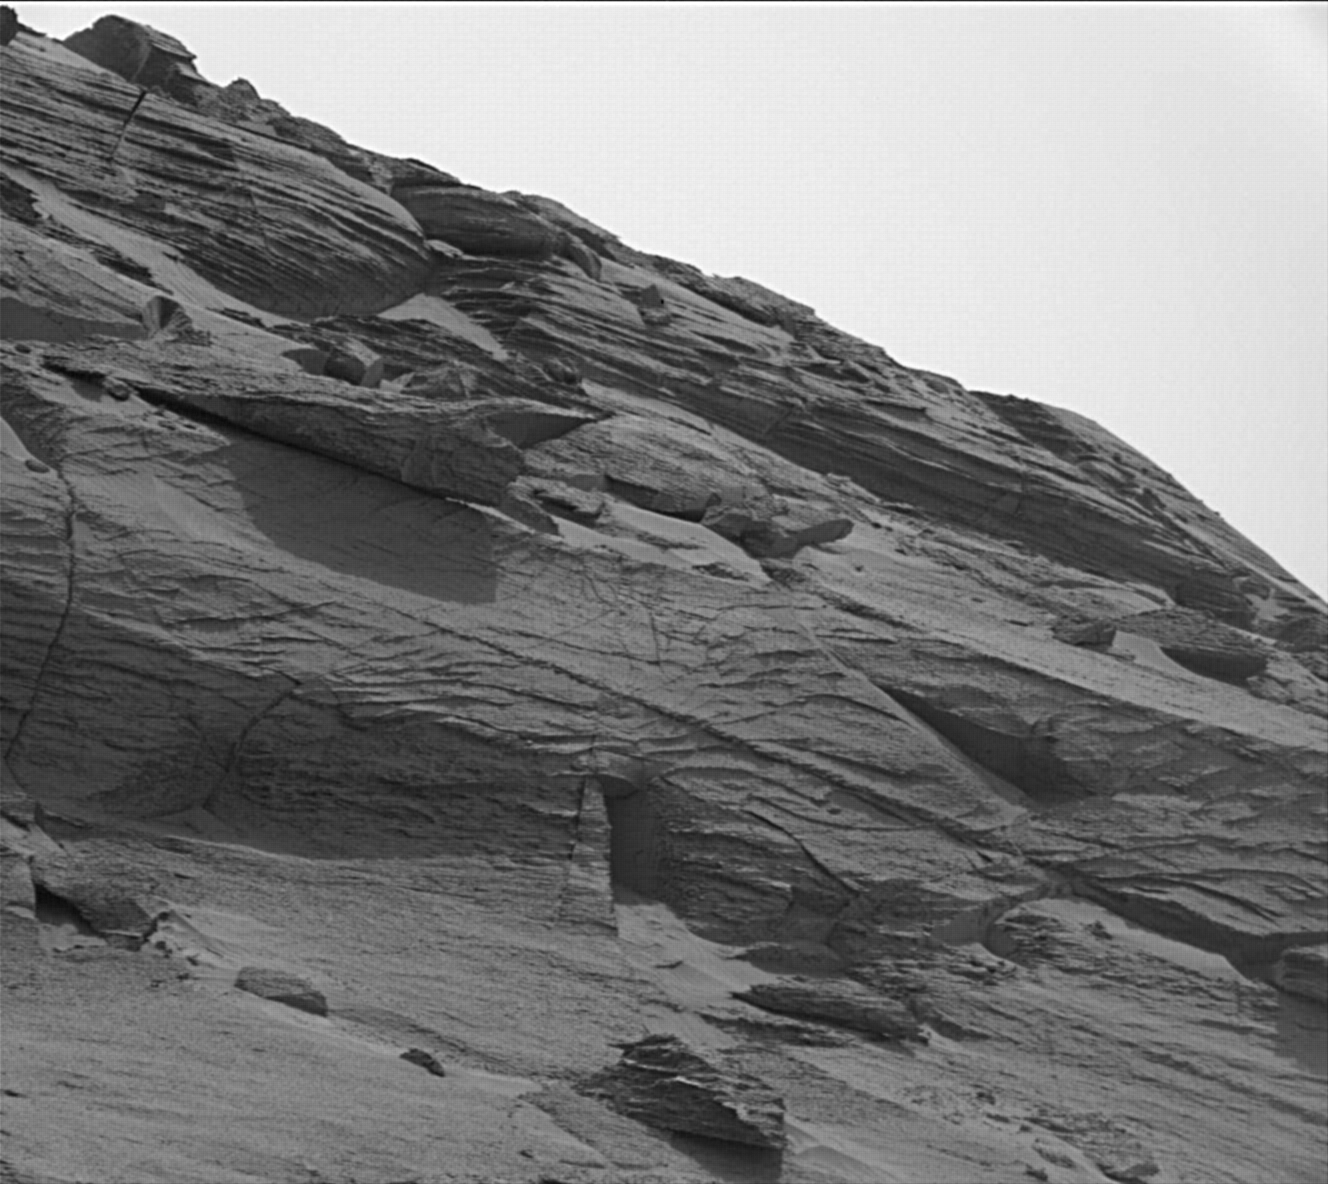 Sol 3465 Anoyther Angle raw_images_1064139_site=msl.jpeg